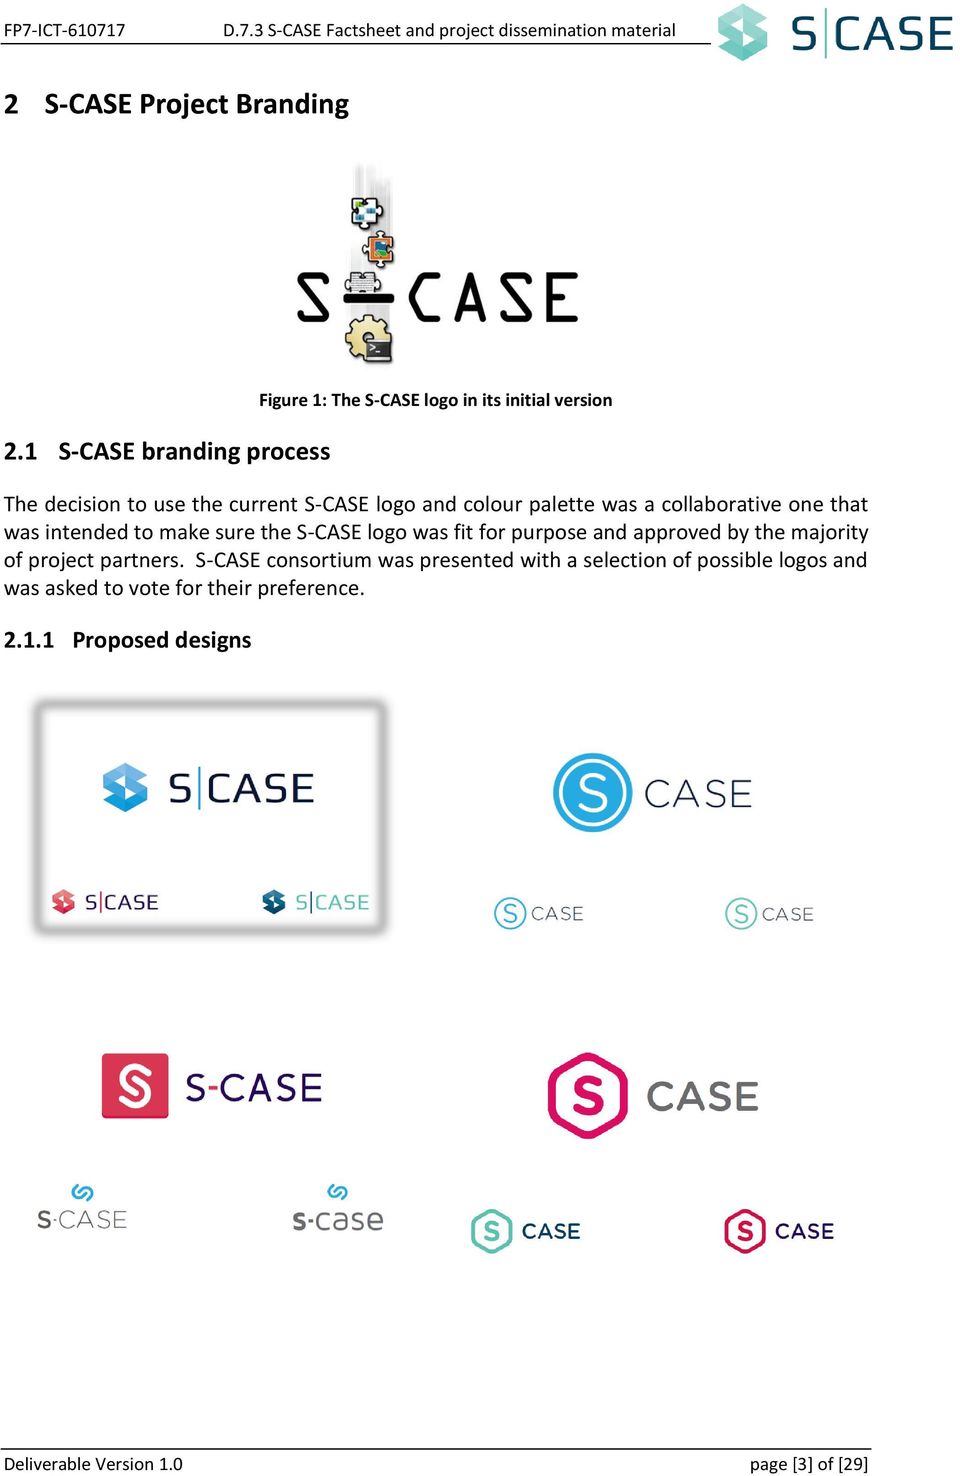 S-CASE logo was fit for purpose and approved by the majority of project partners.